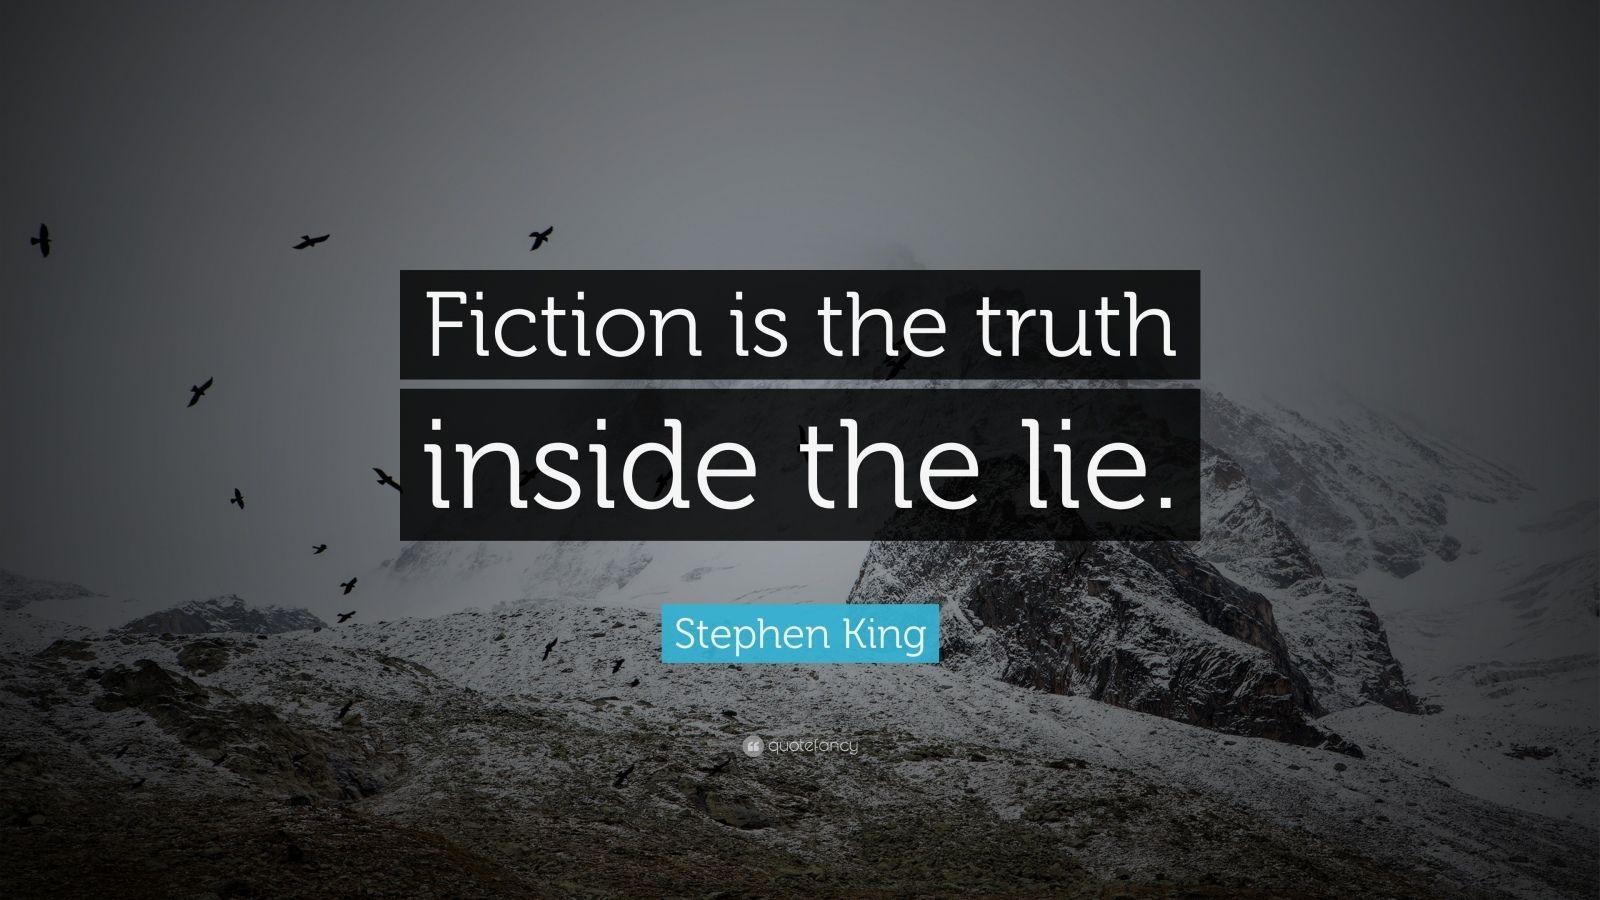 Stephen King Quotes (100 wallpaper)